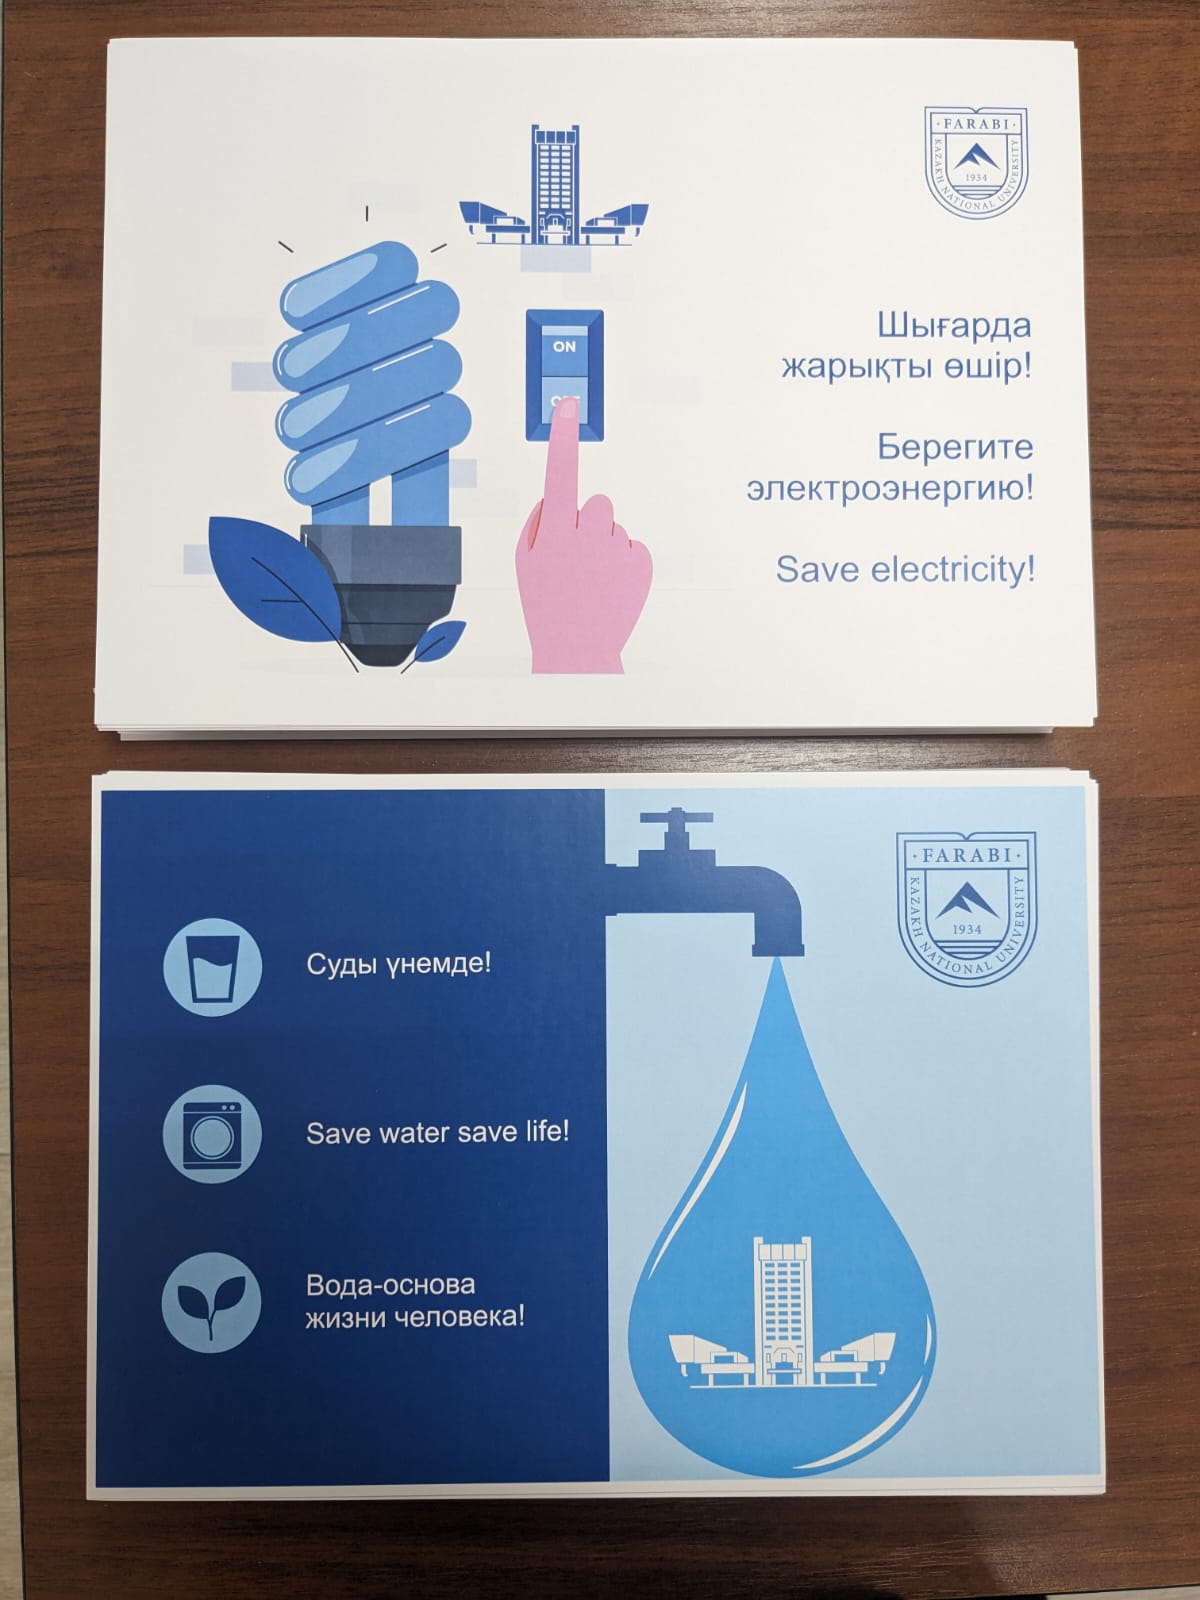 Saving water and electricity